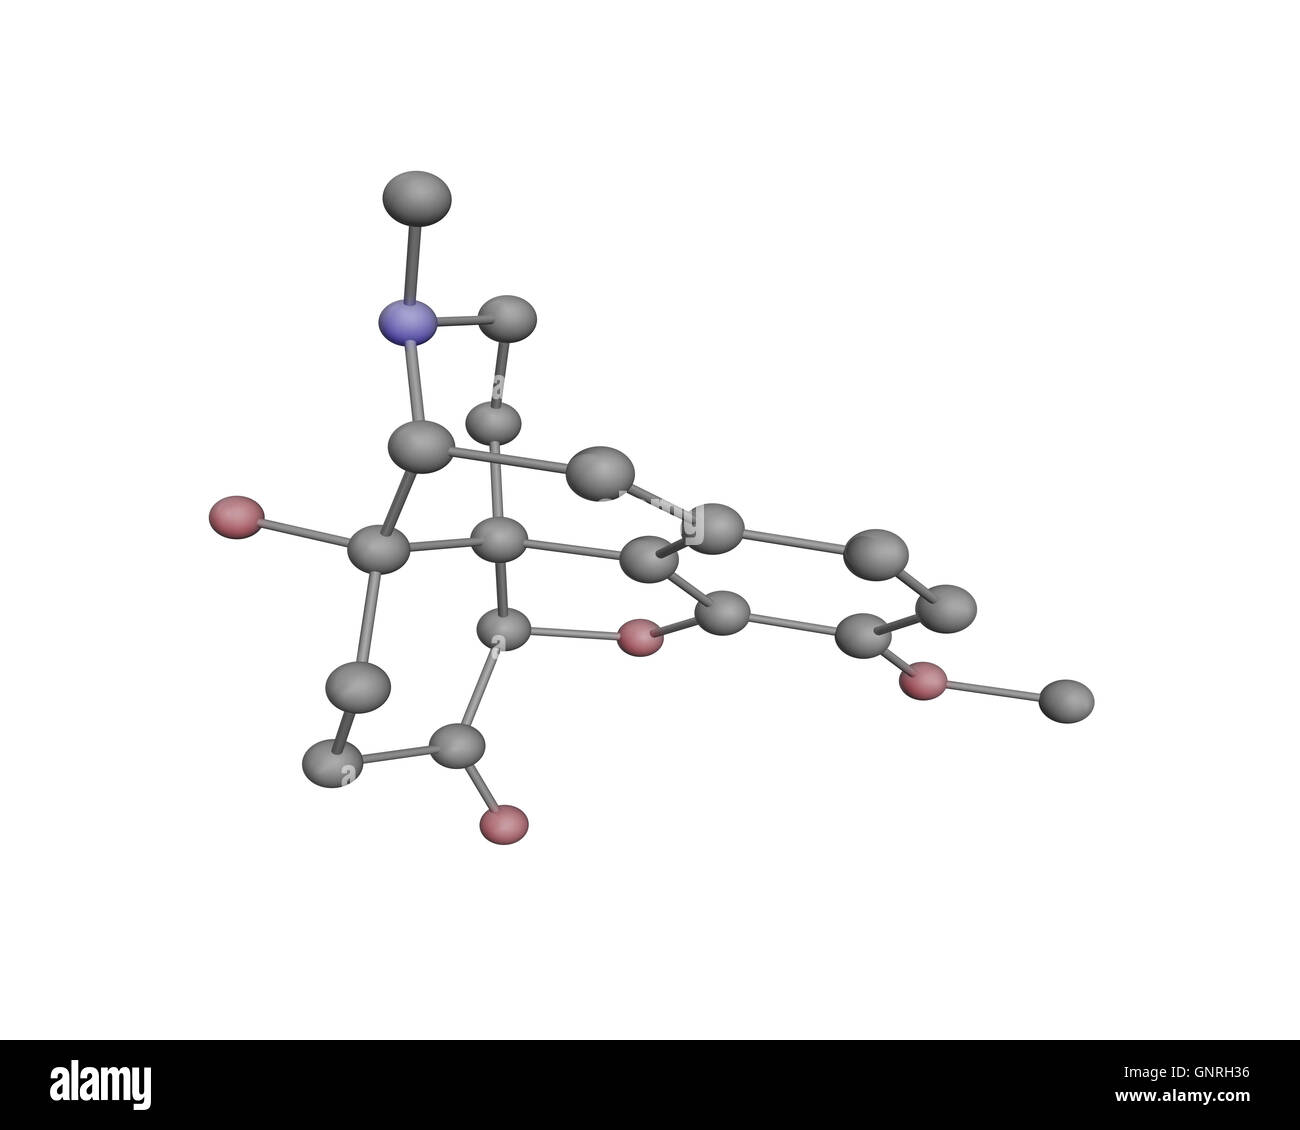 3D illustration of oxycodone molecule-an opioid analgesic for moderate to severe pain. Stock Photo